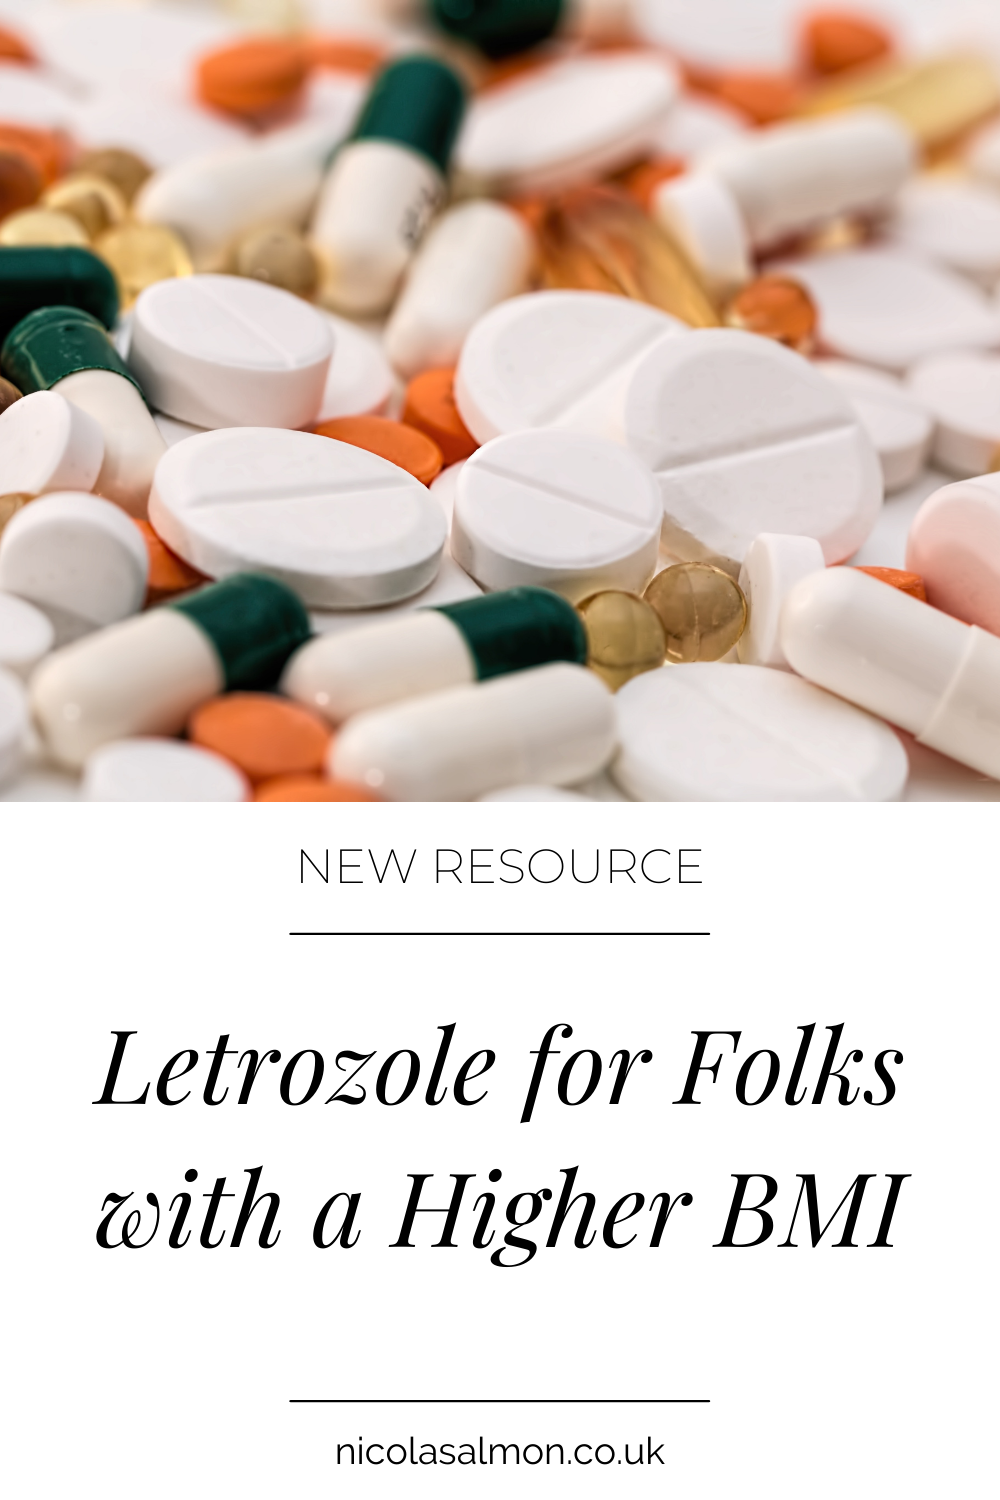 Image of medication with title Letrozole for Folks with Higher BMI